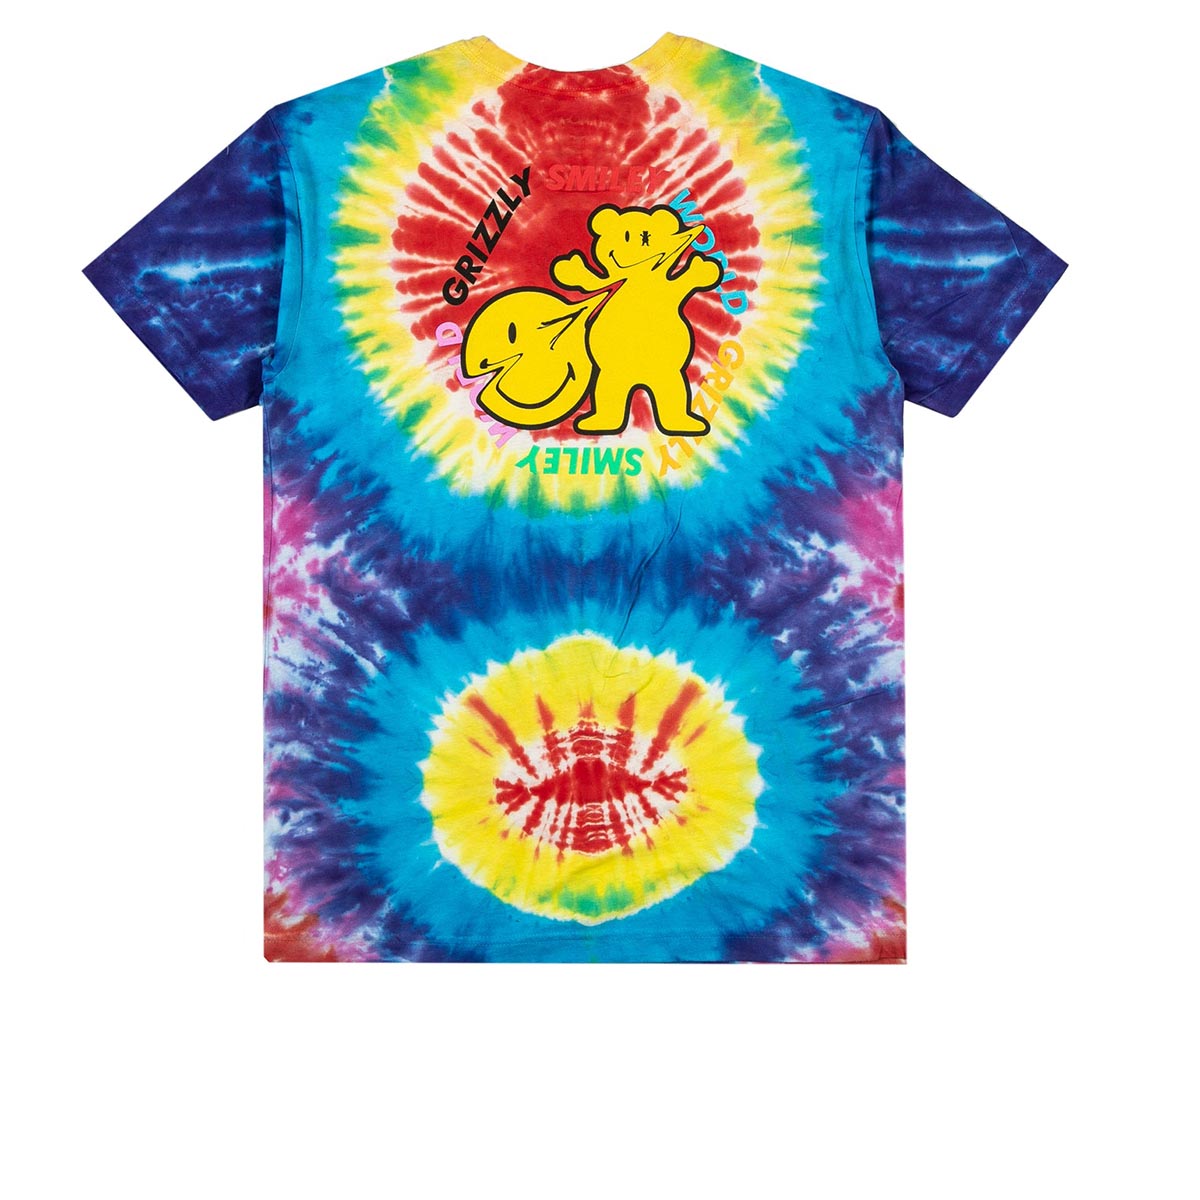 Grizzly x Smiley World T-Shirt - Tie Dye image 2